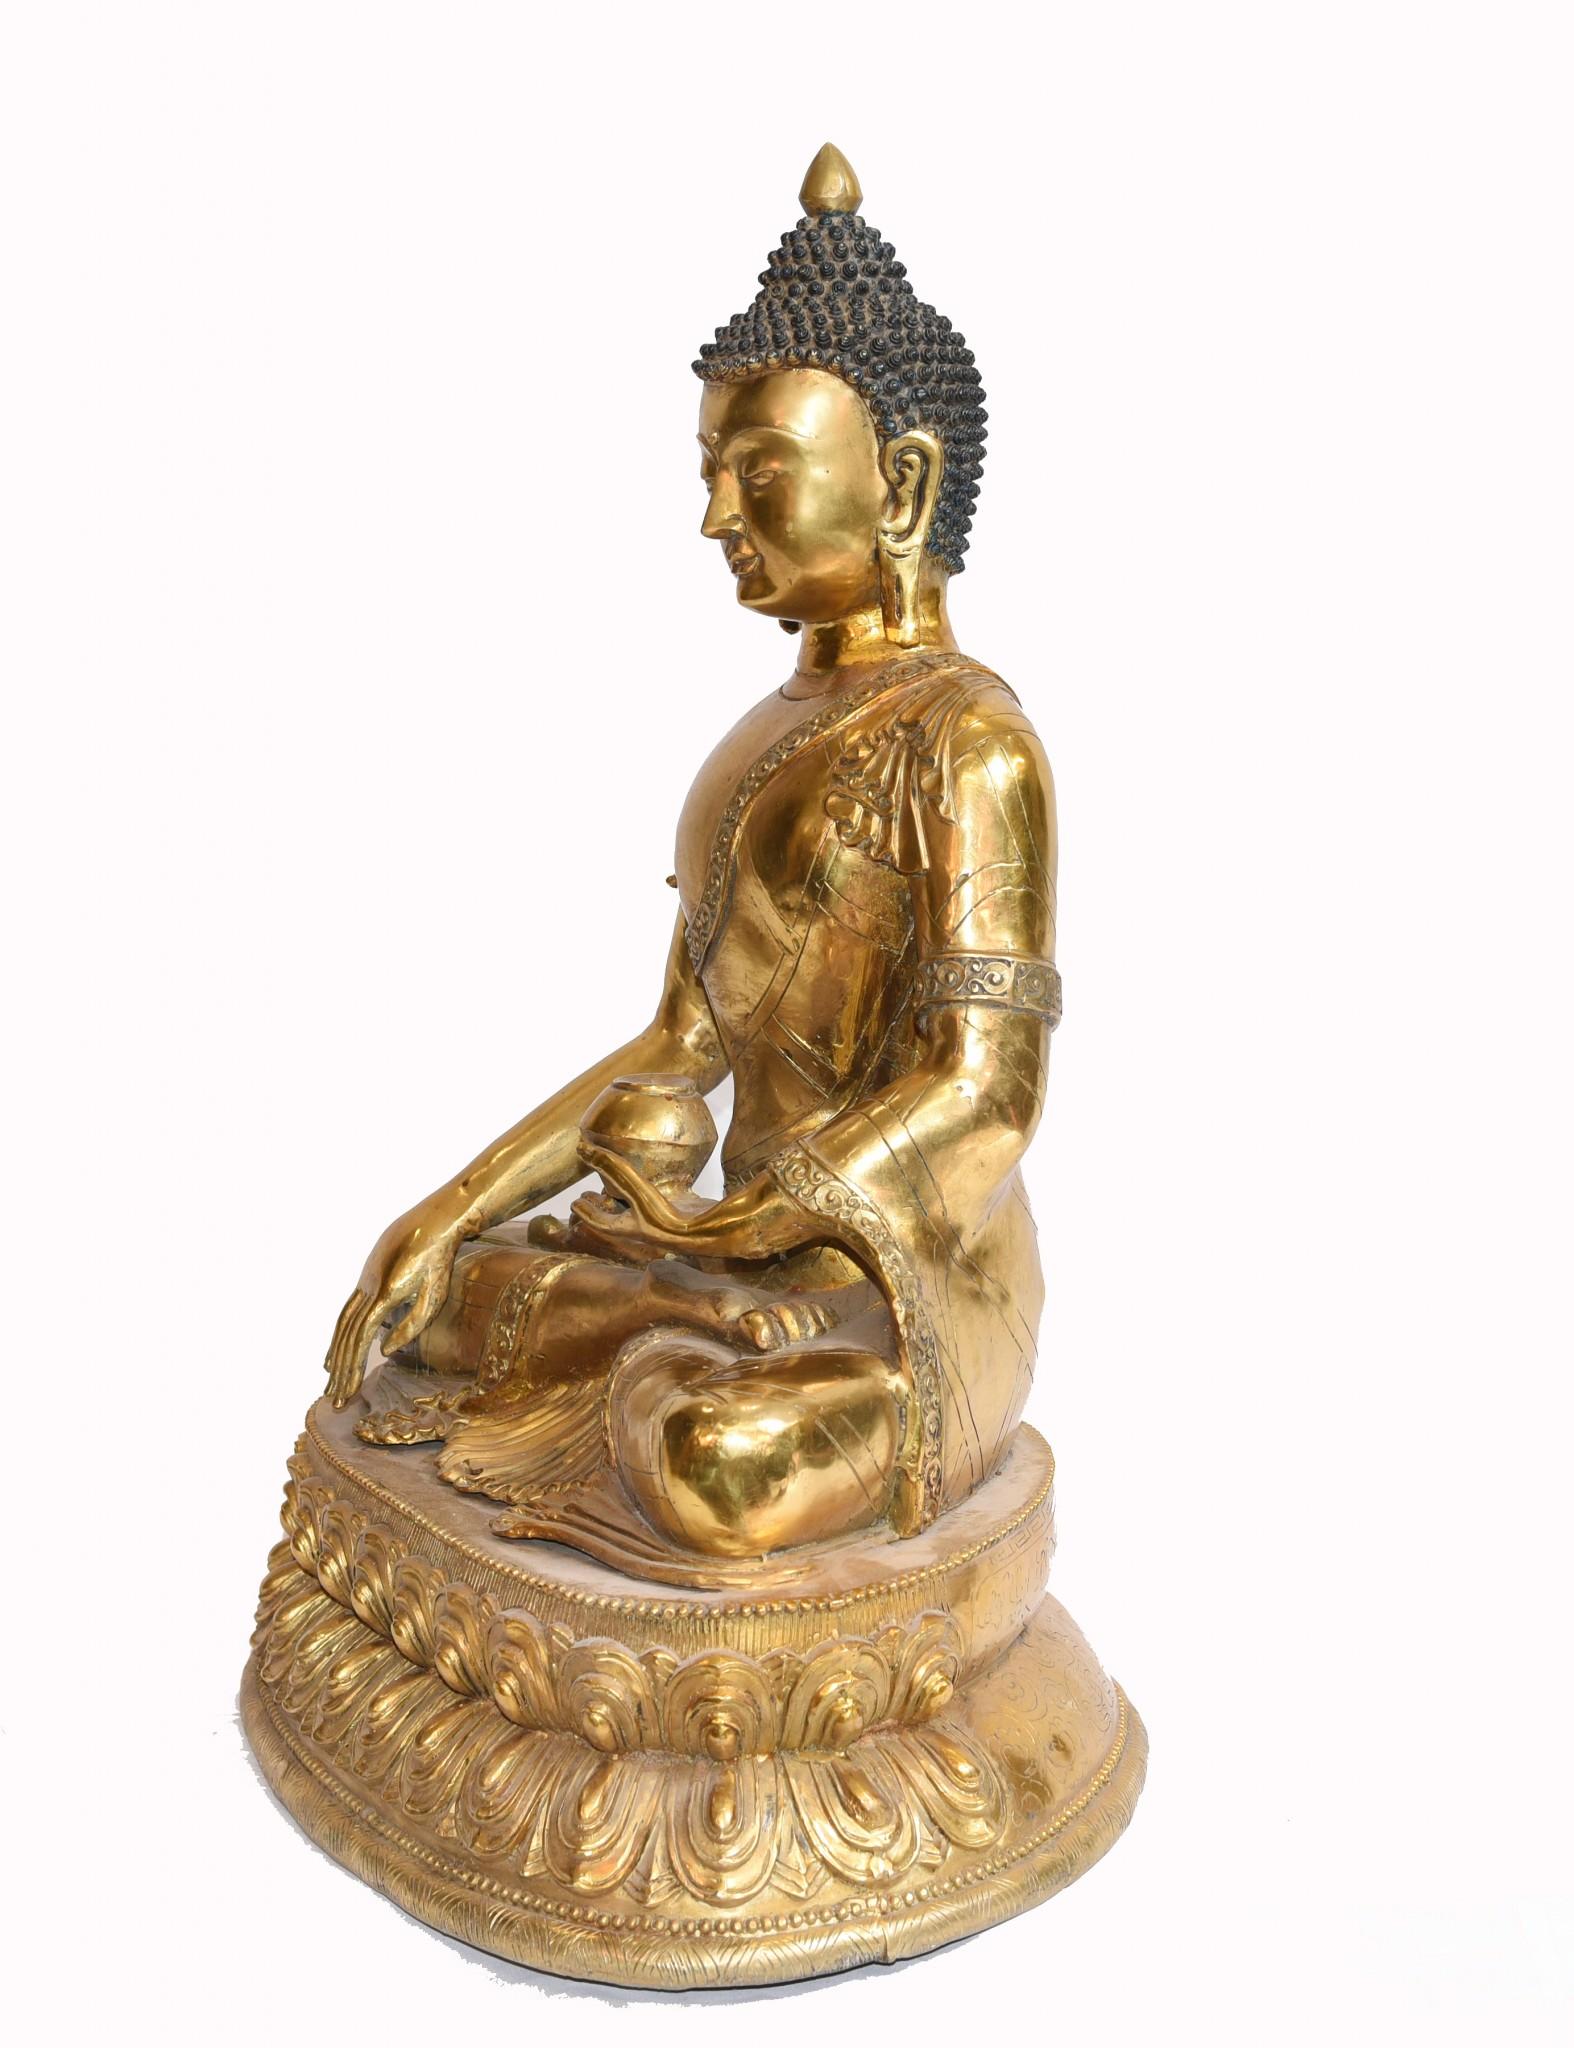 Nepalese Buddha Statue Meditation Casting Lotus Throne Sculpture For Sale 8